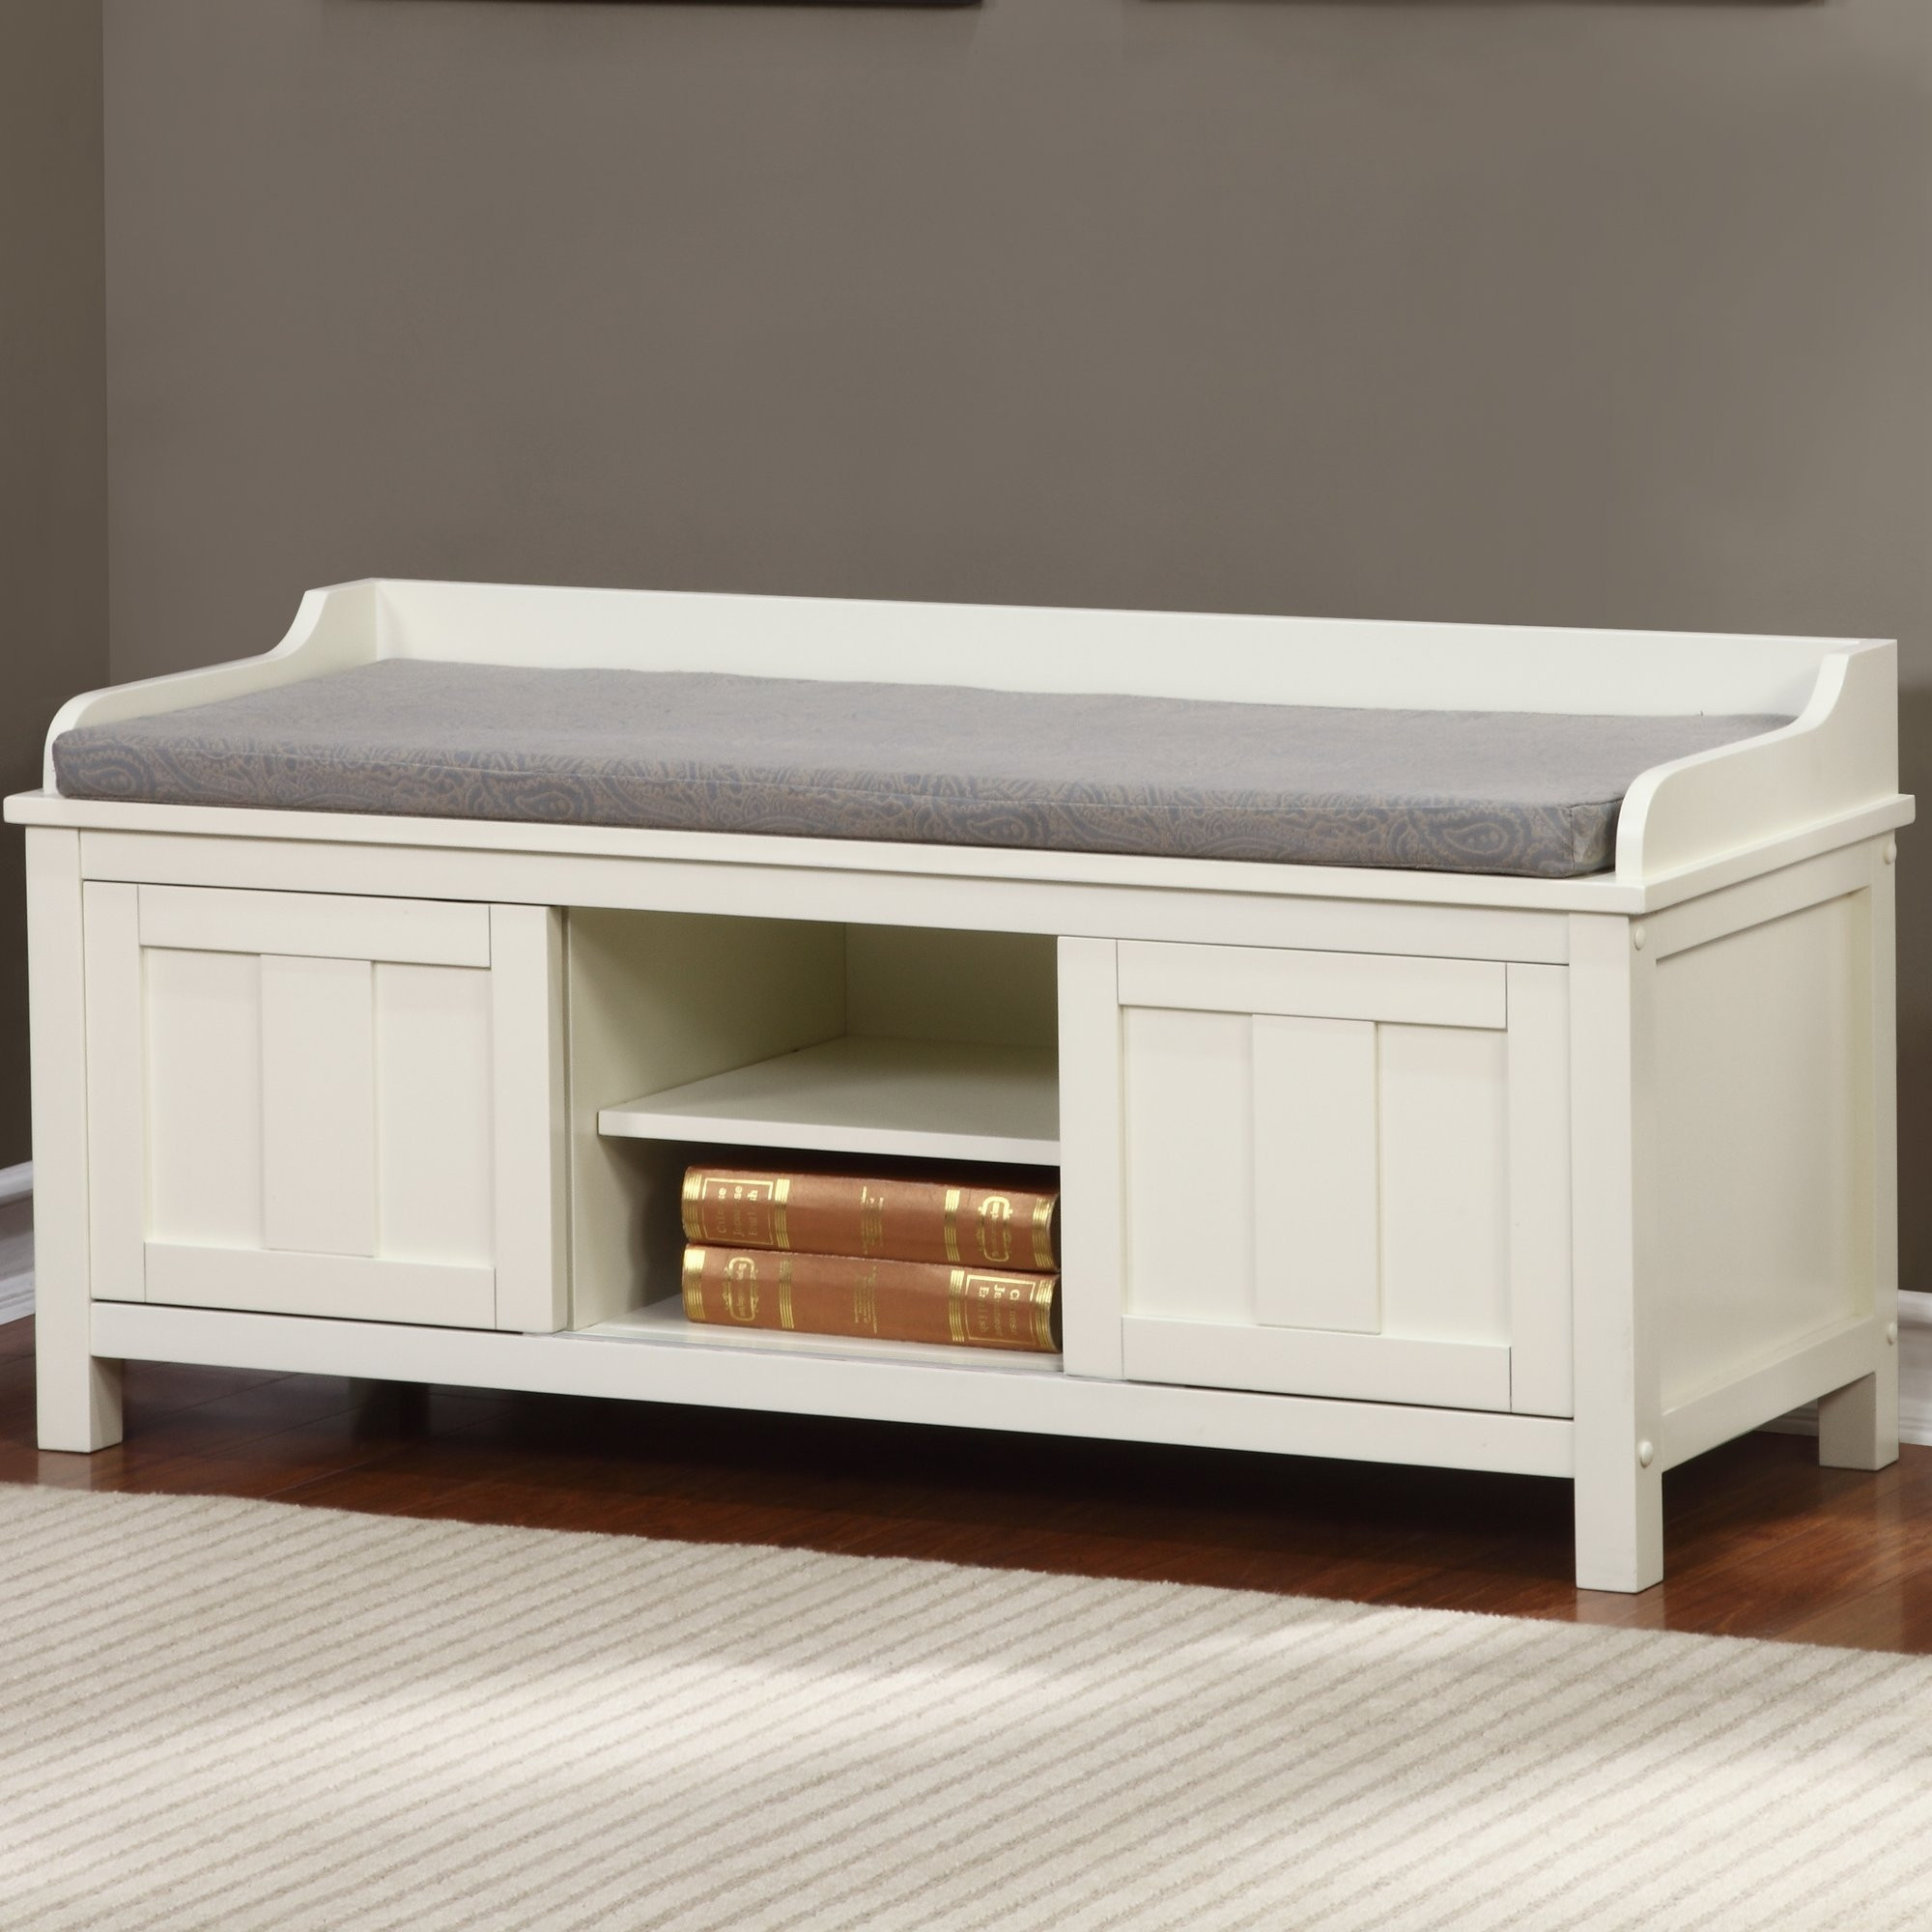 Extra Long Storage Bench
 Extra Long Bedroom Storage Bench